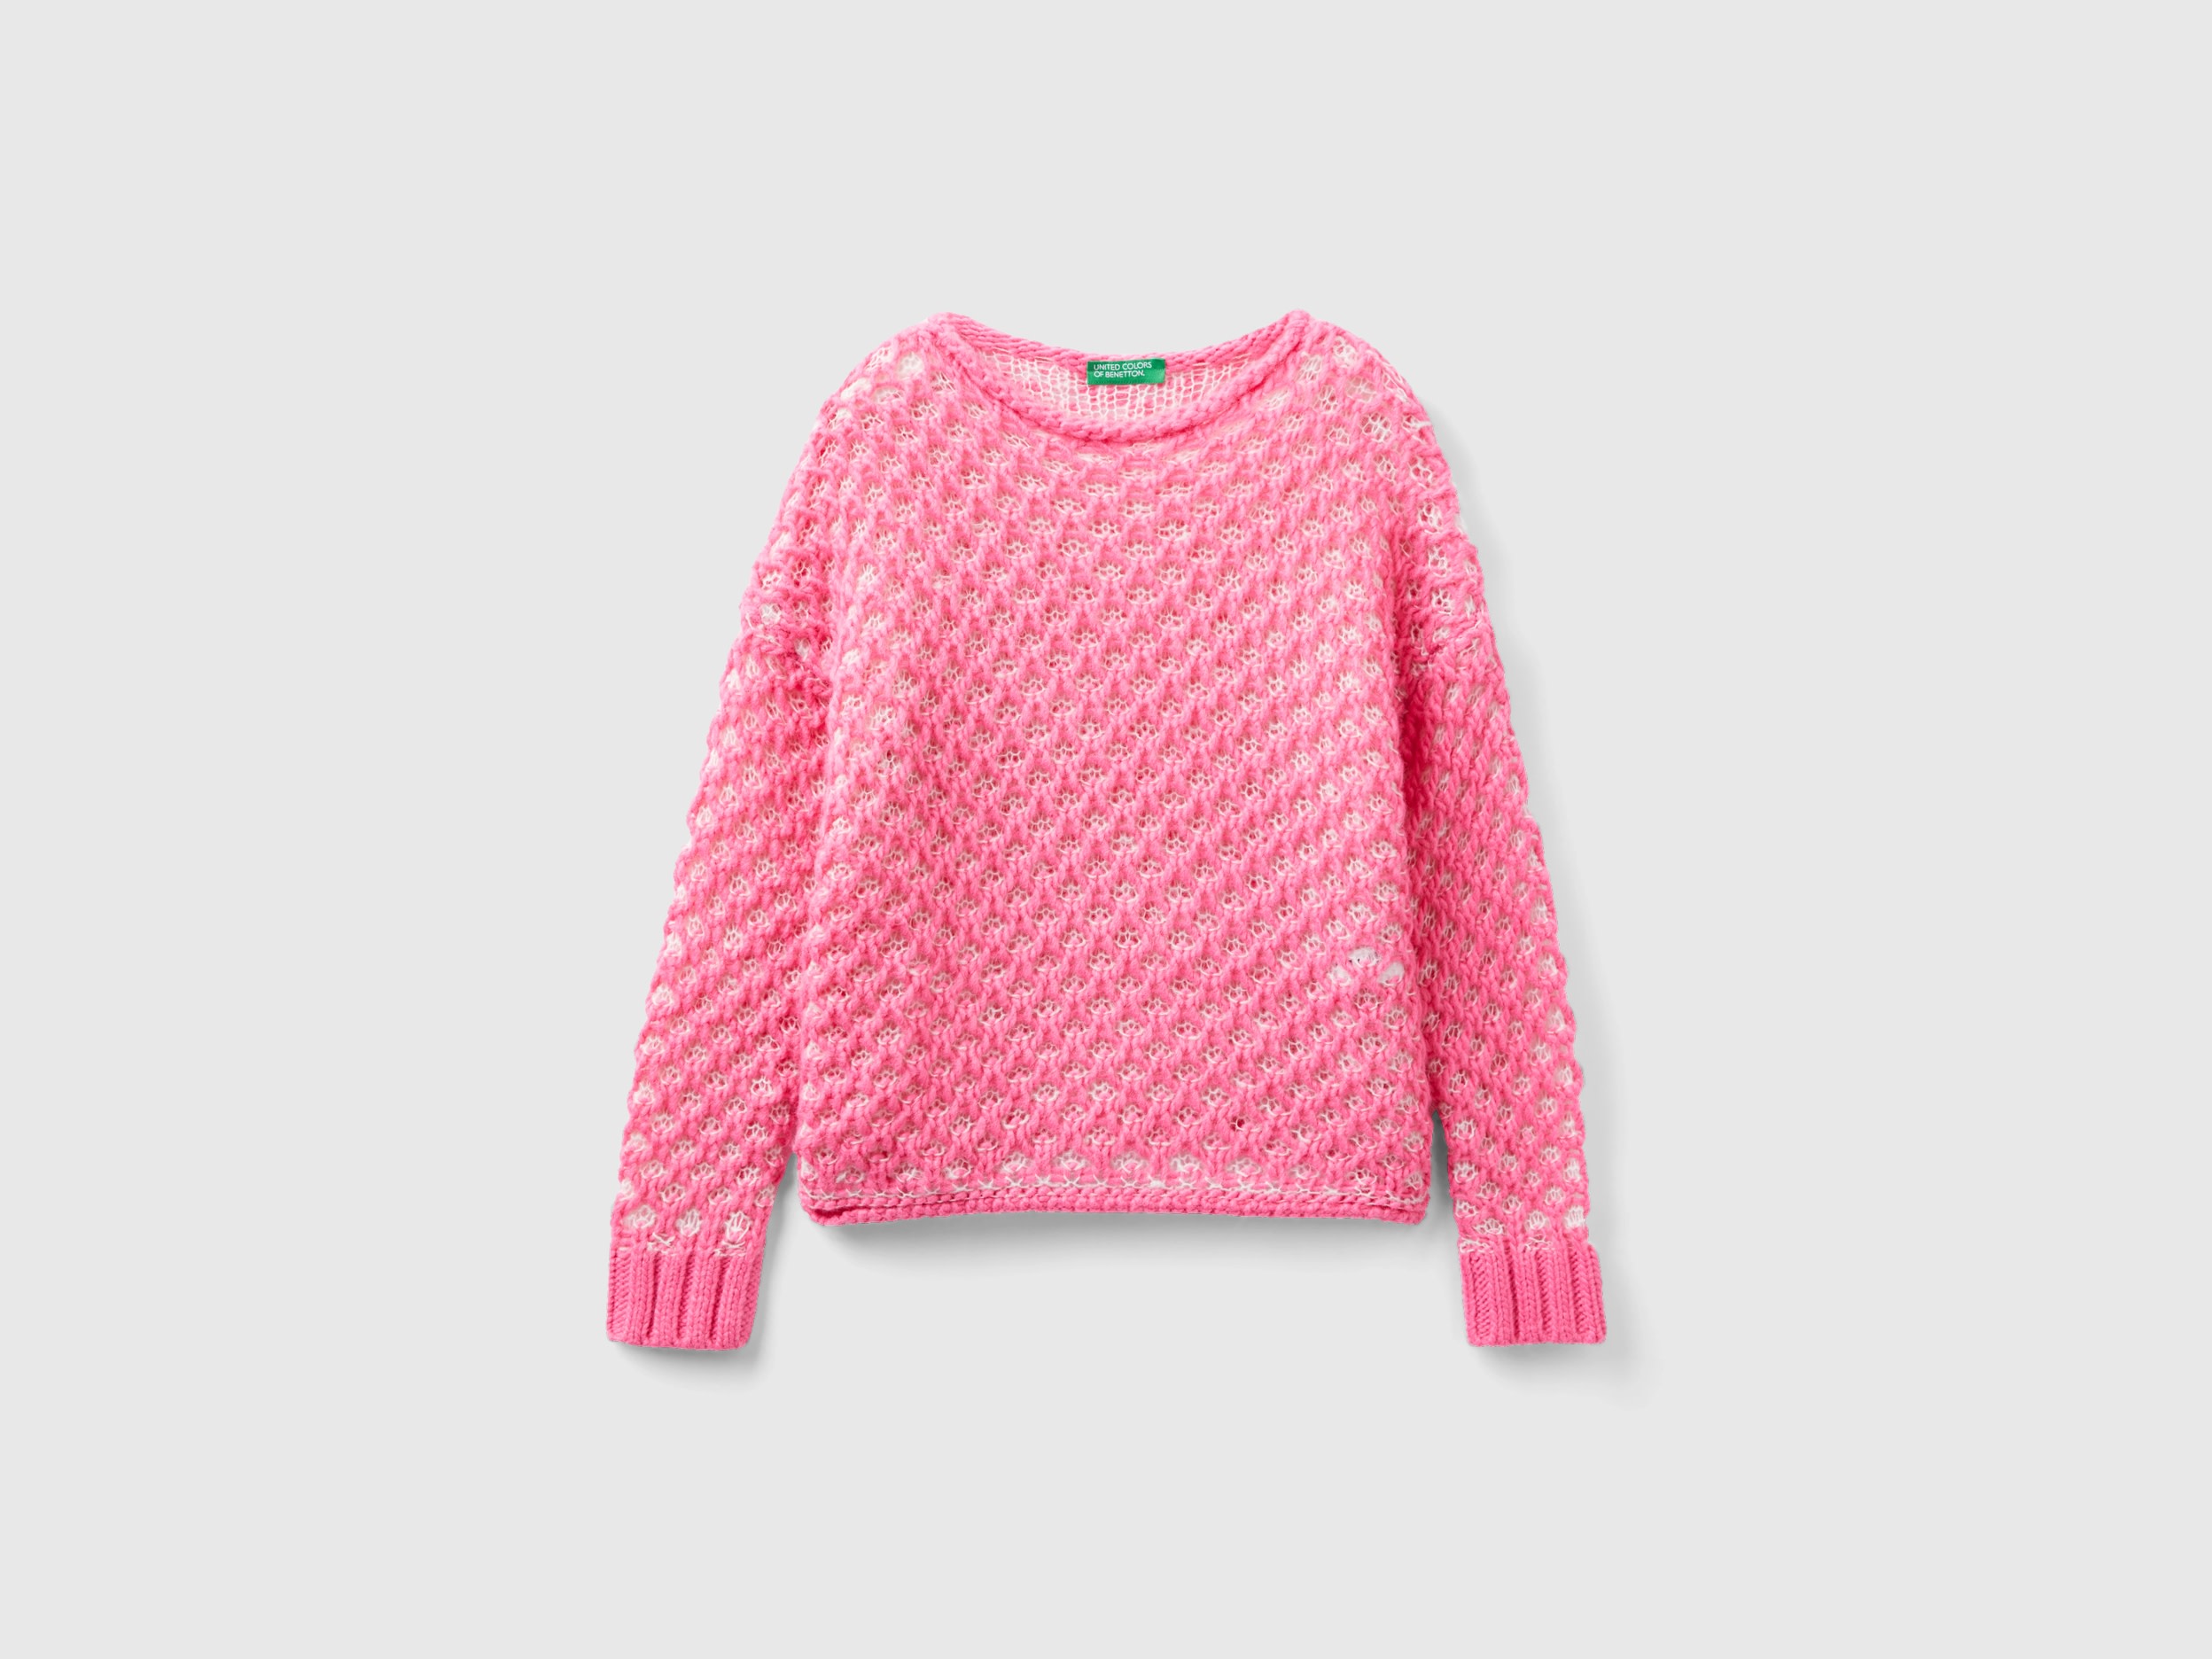 Benetton, Sweater With Jacquard Mesh, size S, Pink, Kids